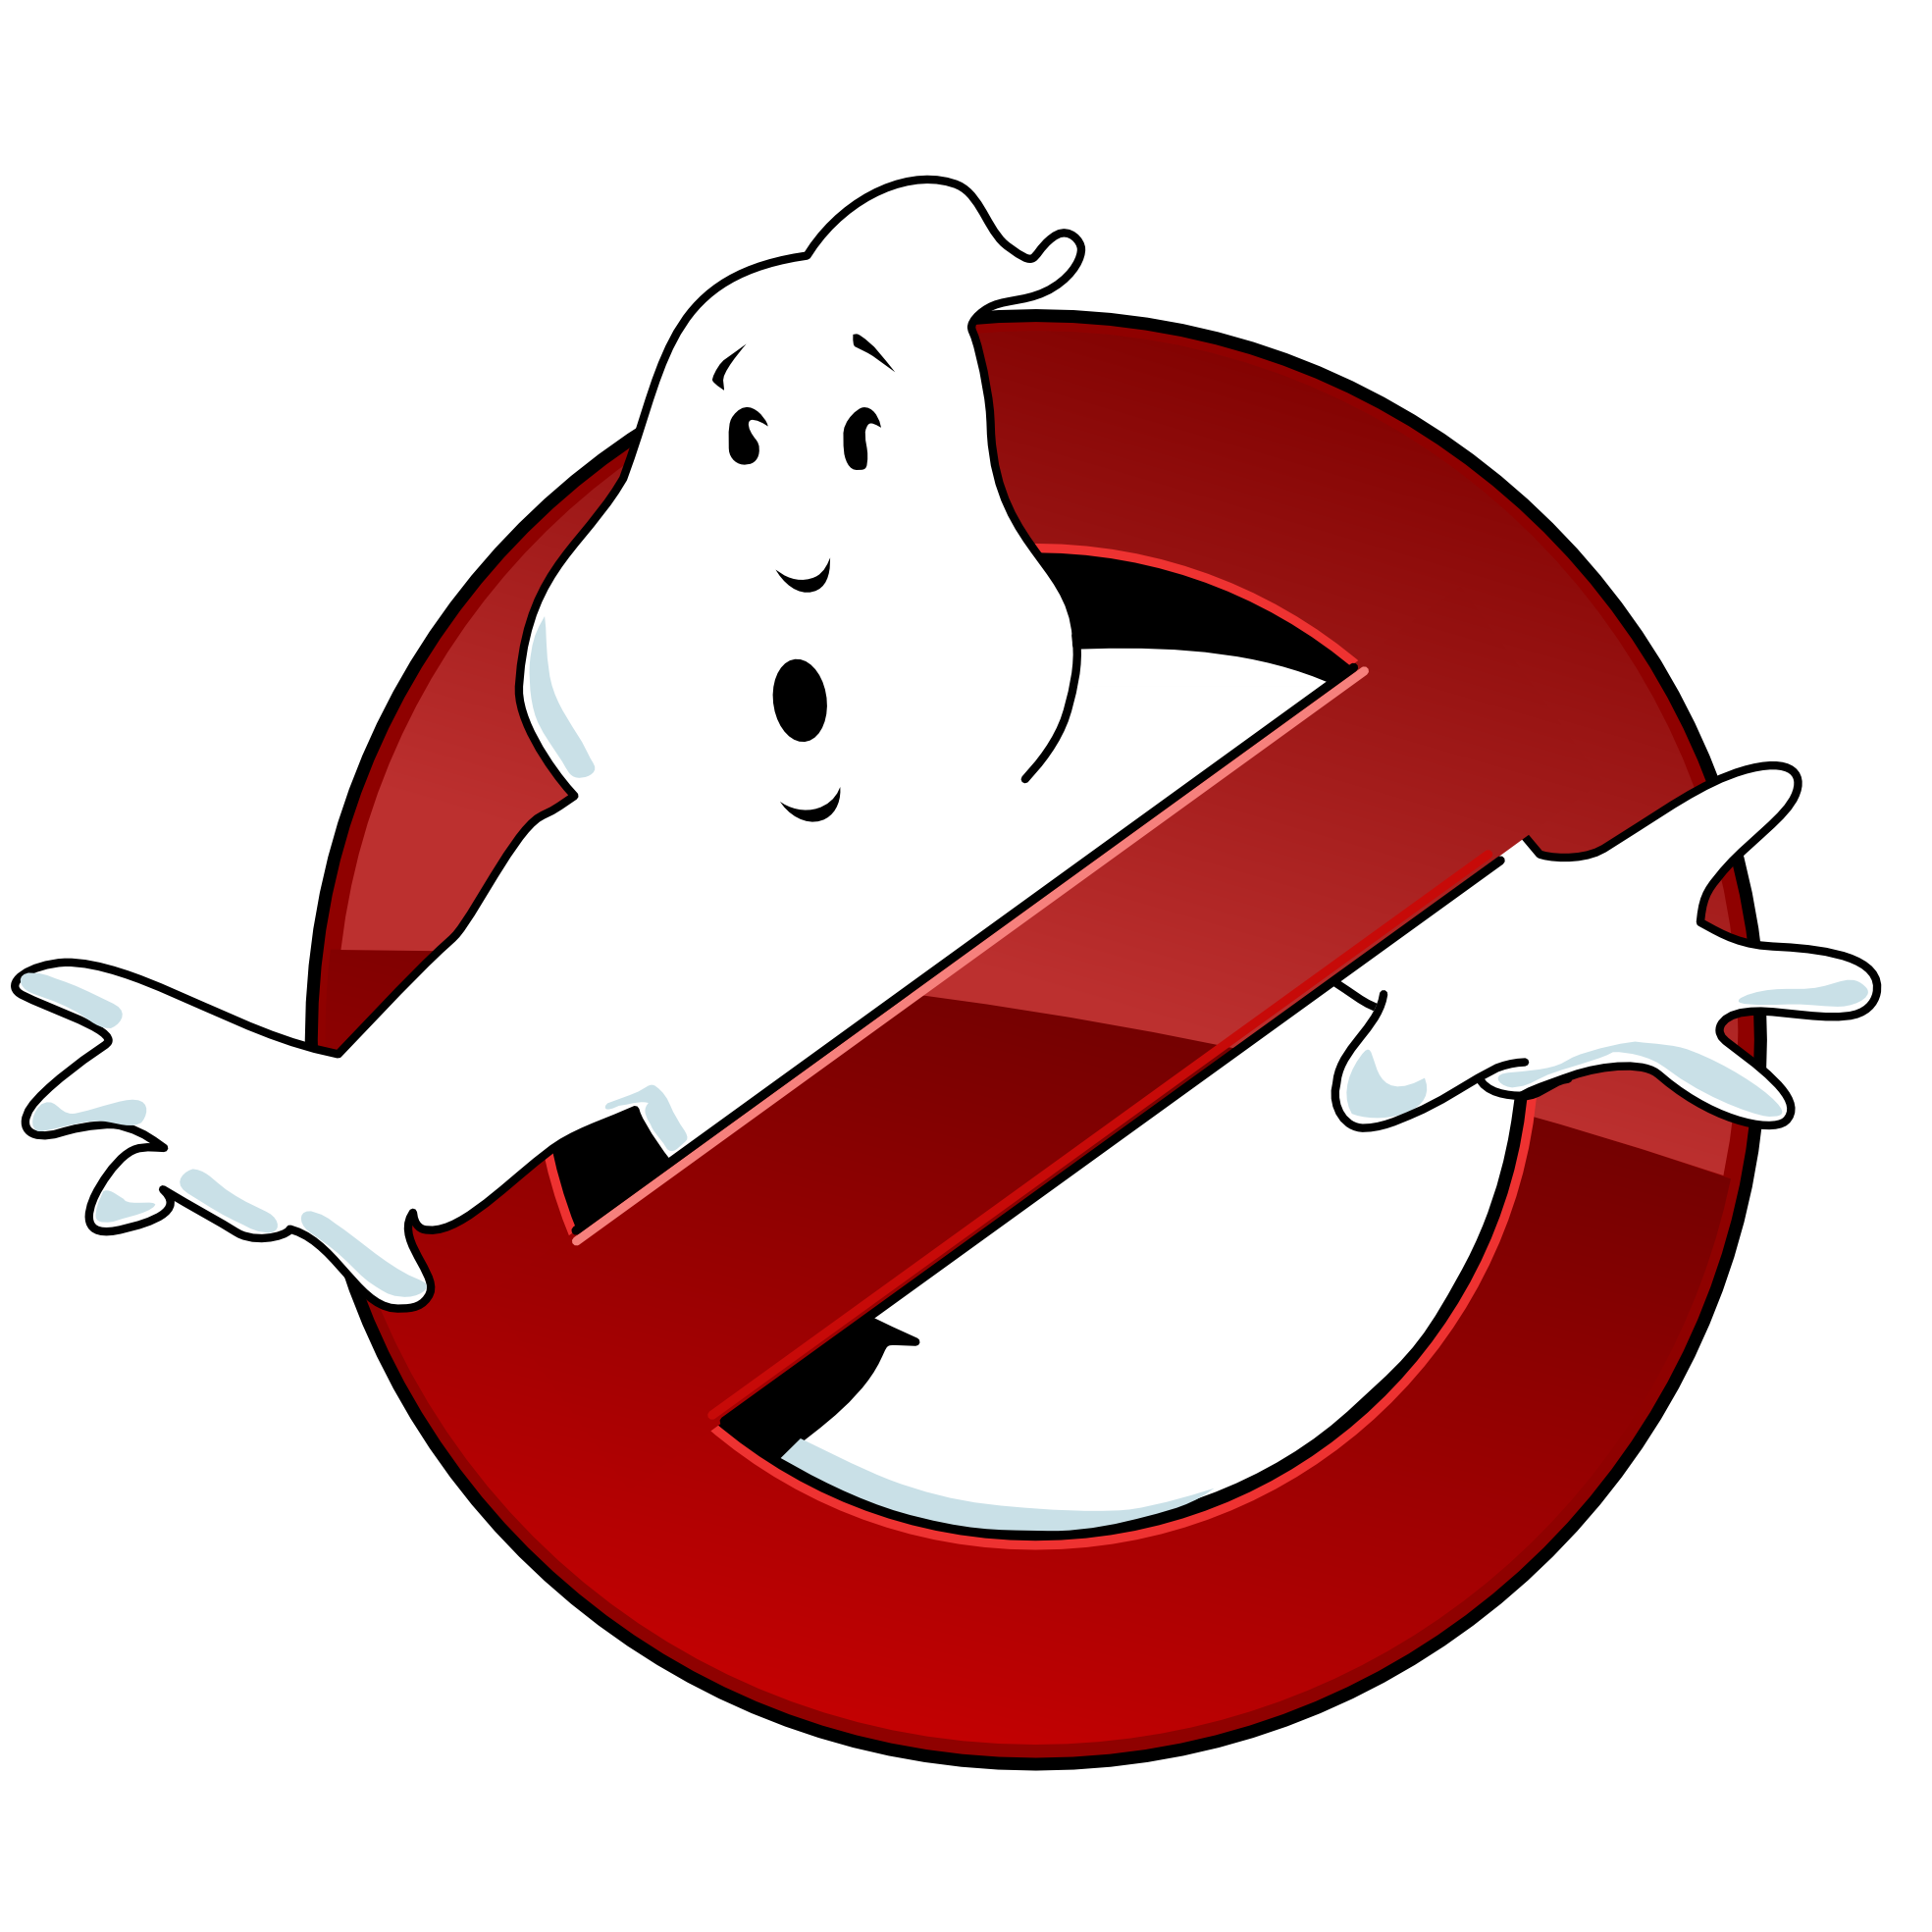 Download PNG image - Halloween Ghost PNG Pic 